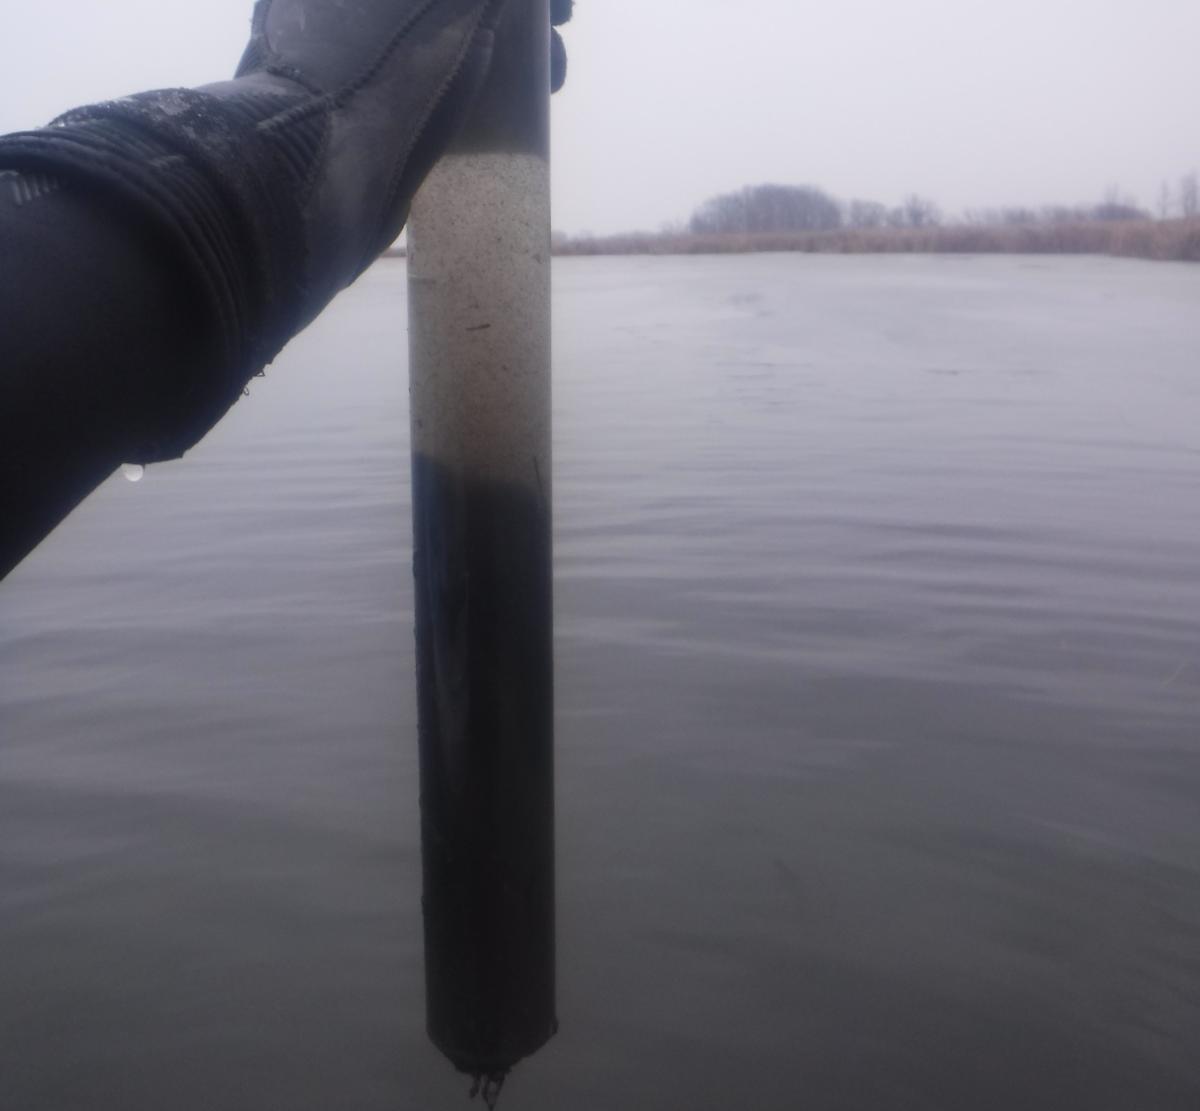 A gloved hand holding up a plastic tube with water and sediment in it. In the background is a calm body of water on an overcast day.